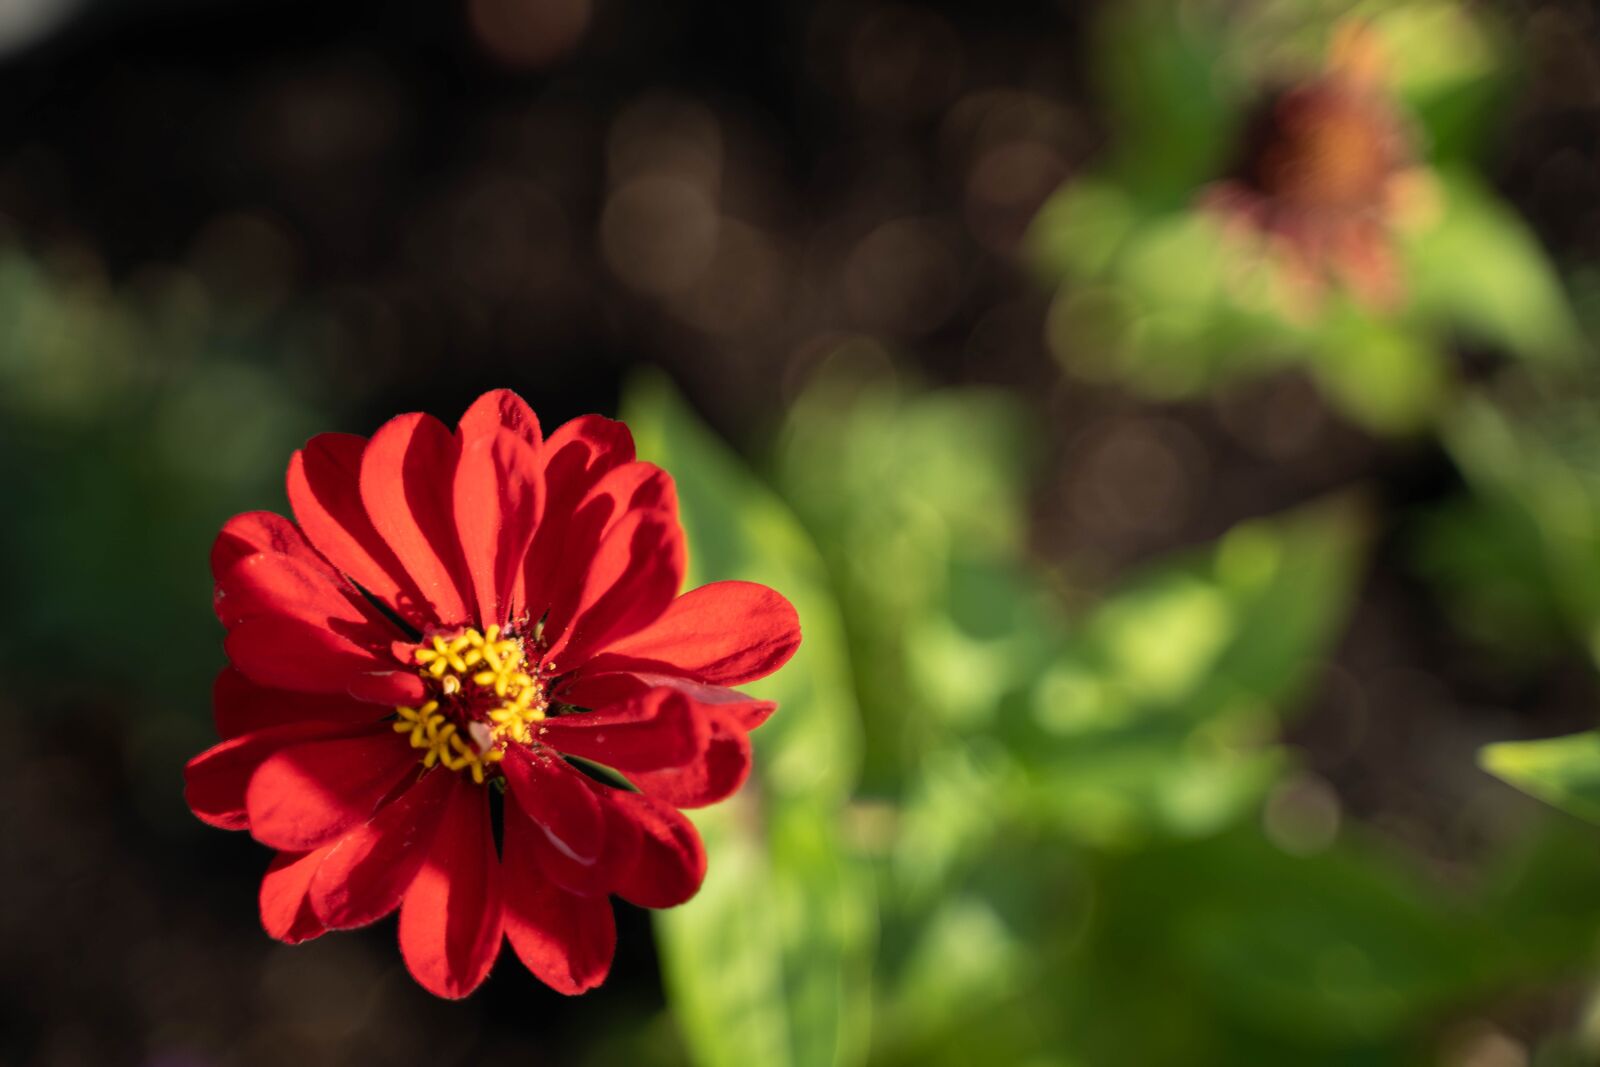 Sony a7 III sample photo. Flowers, red flowers, garden photography